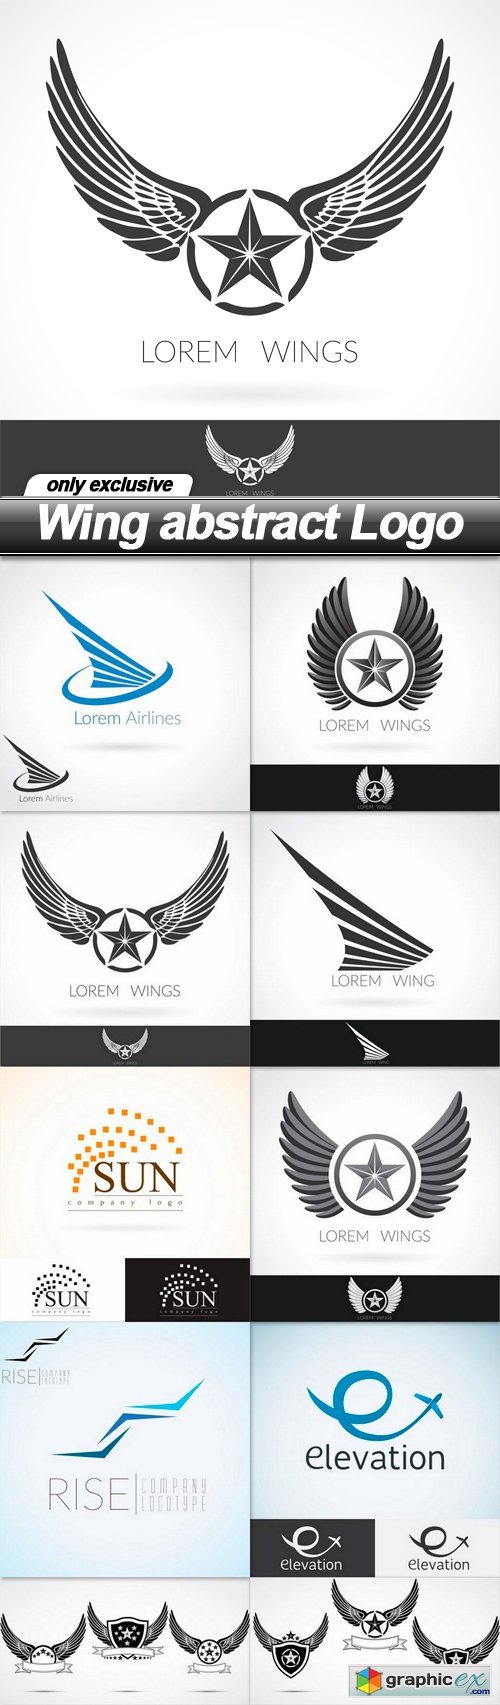  Wing abstract Logo - 10 EPS